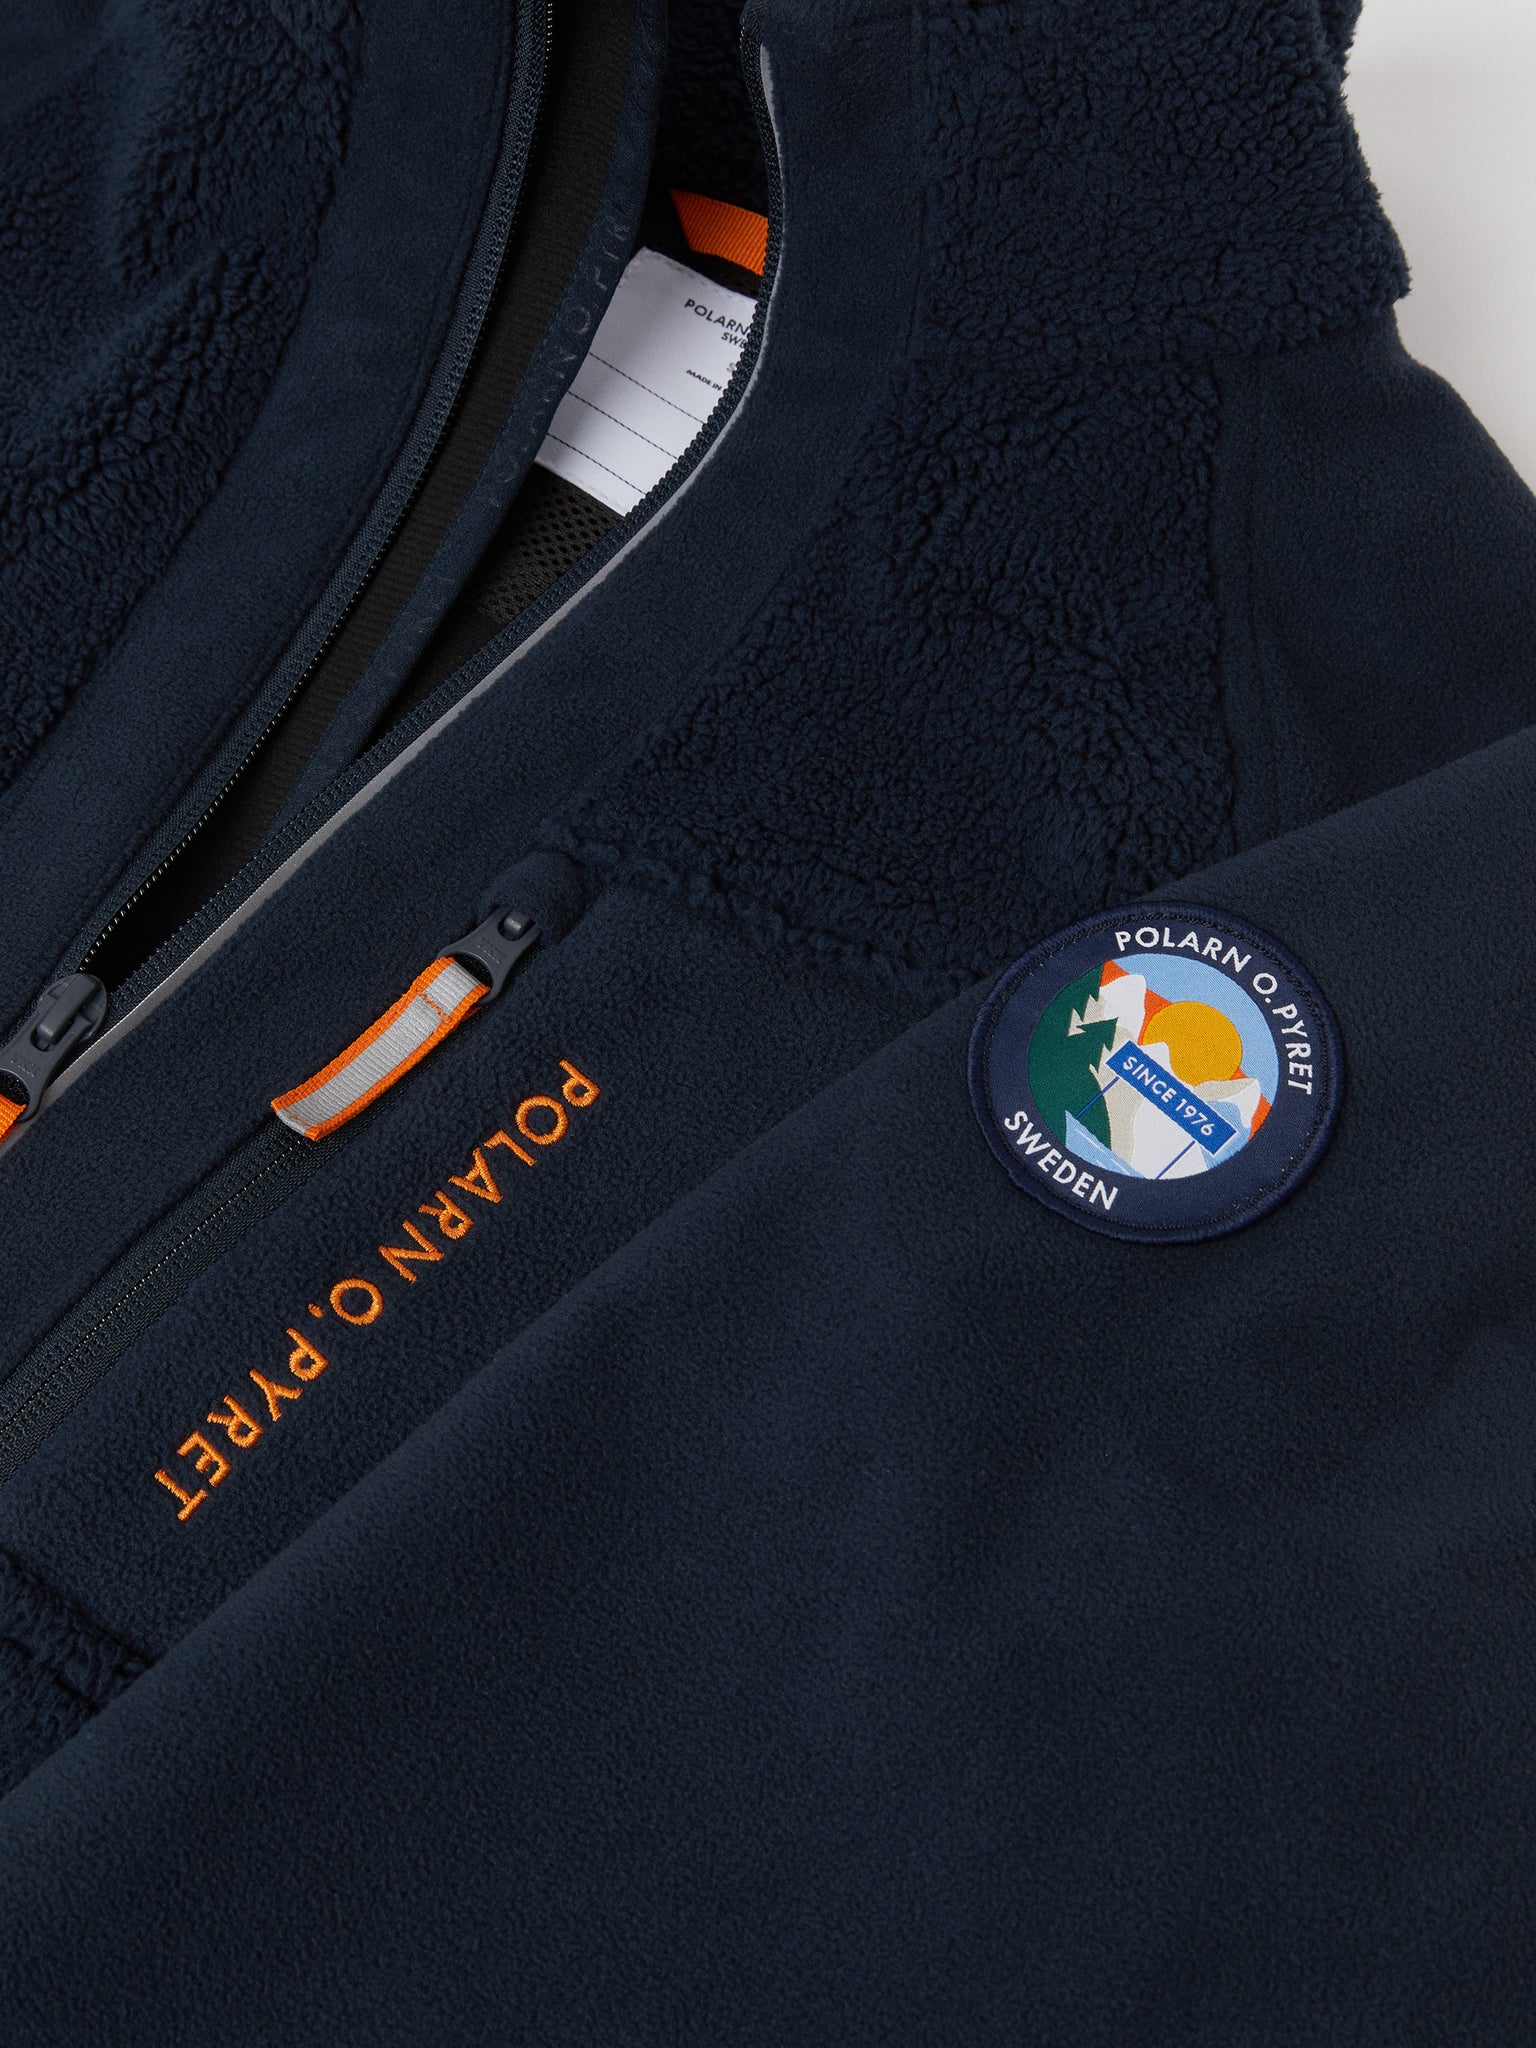 Navy Waterproof Adult Fleece Jacket from the Polarn O. Pyret outerwear collection. Quality kids clothing made to last.